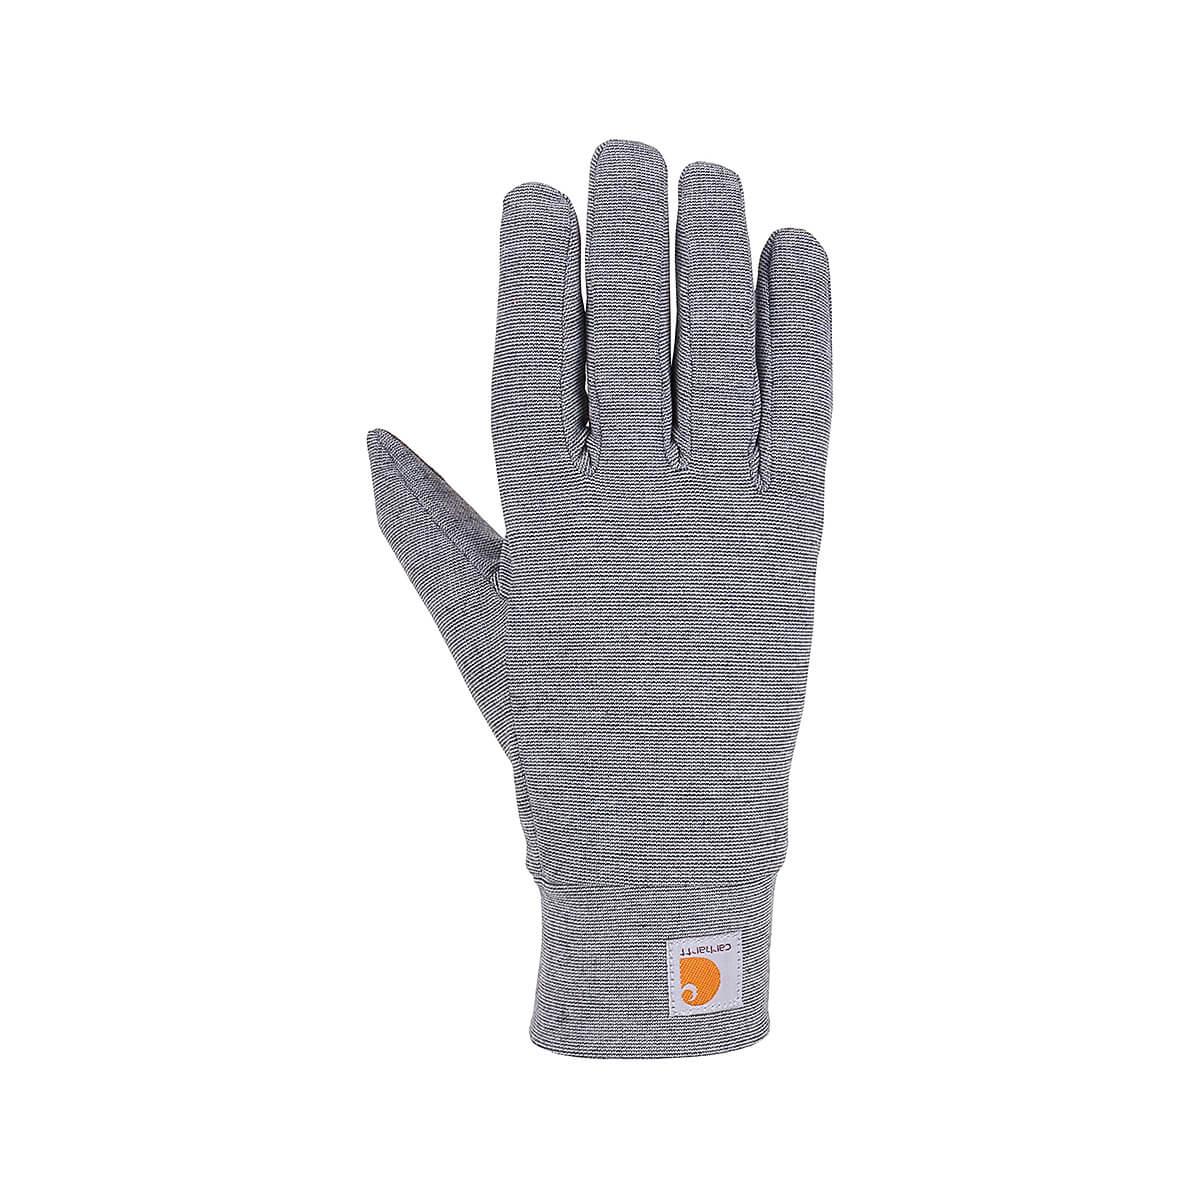  Force Heavyweight Liner Knit Gloves